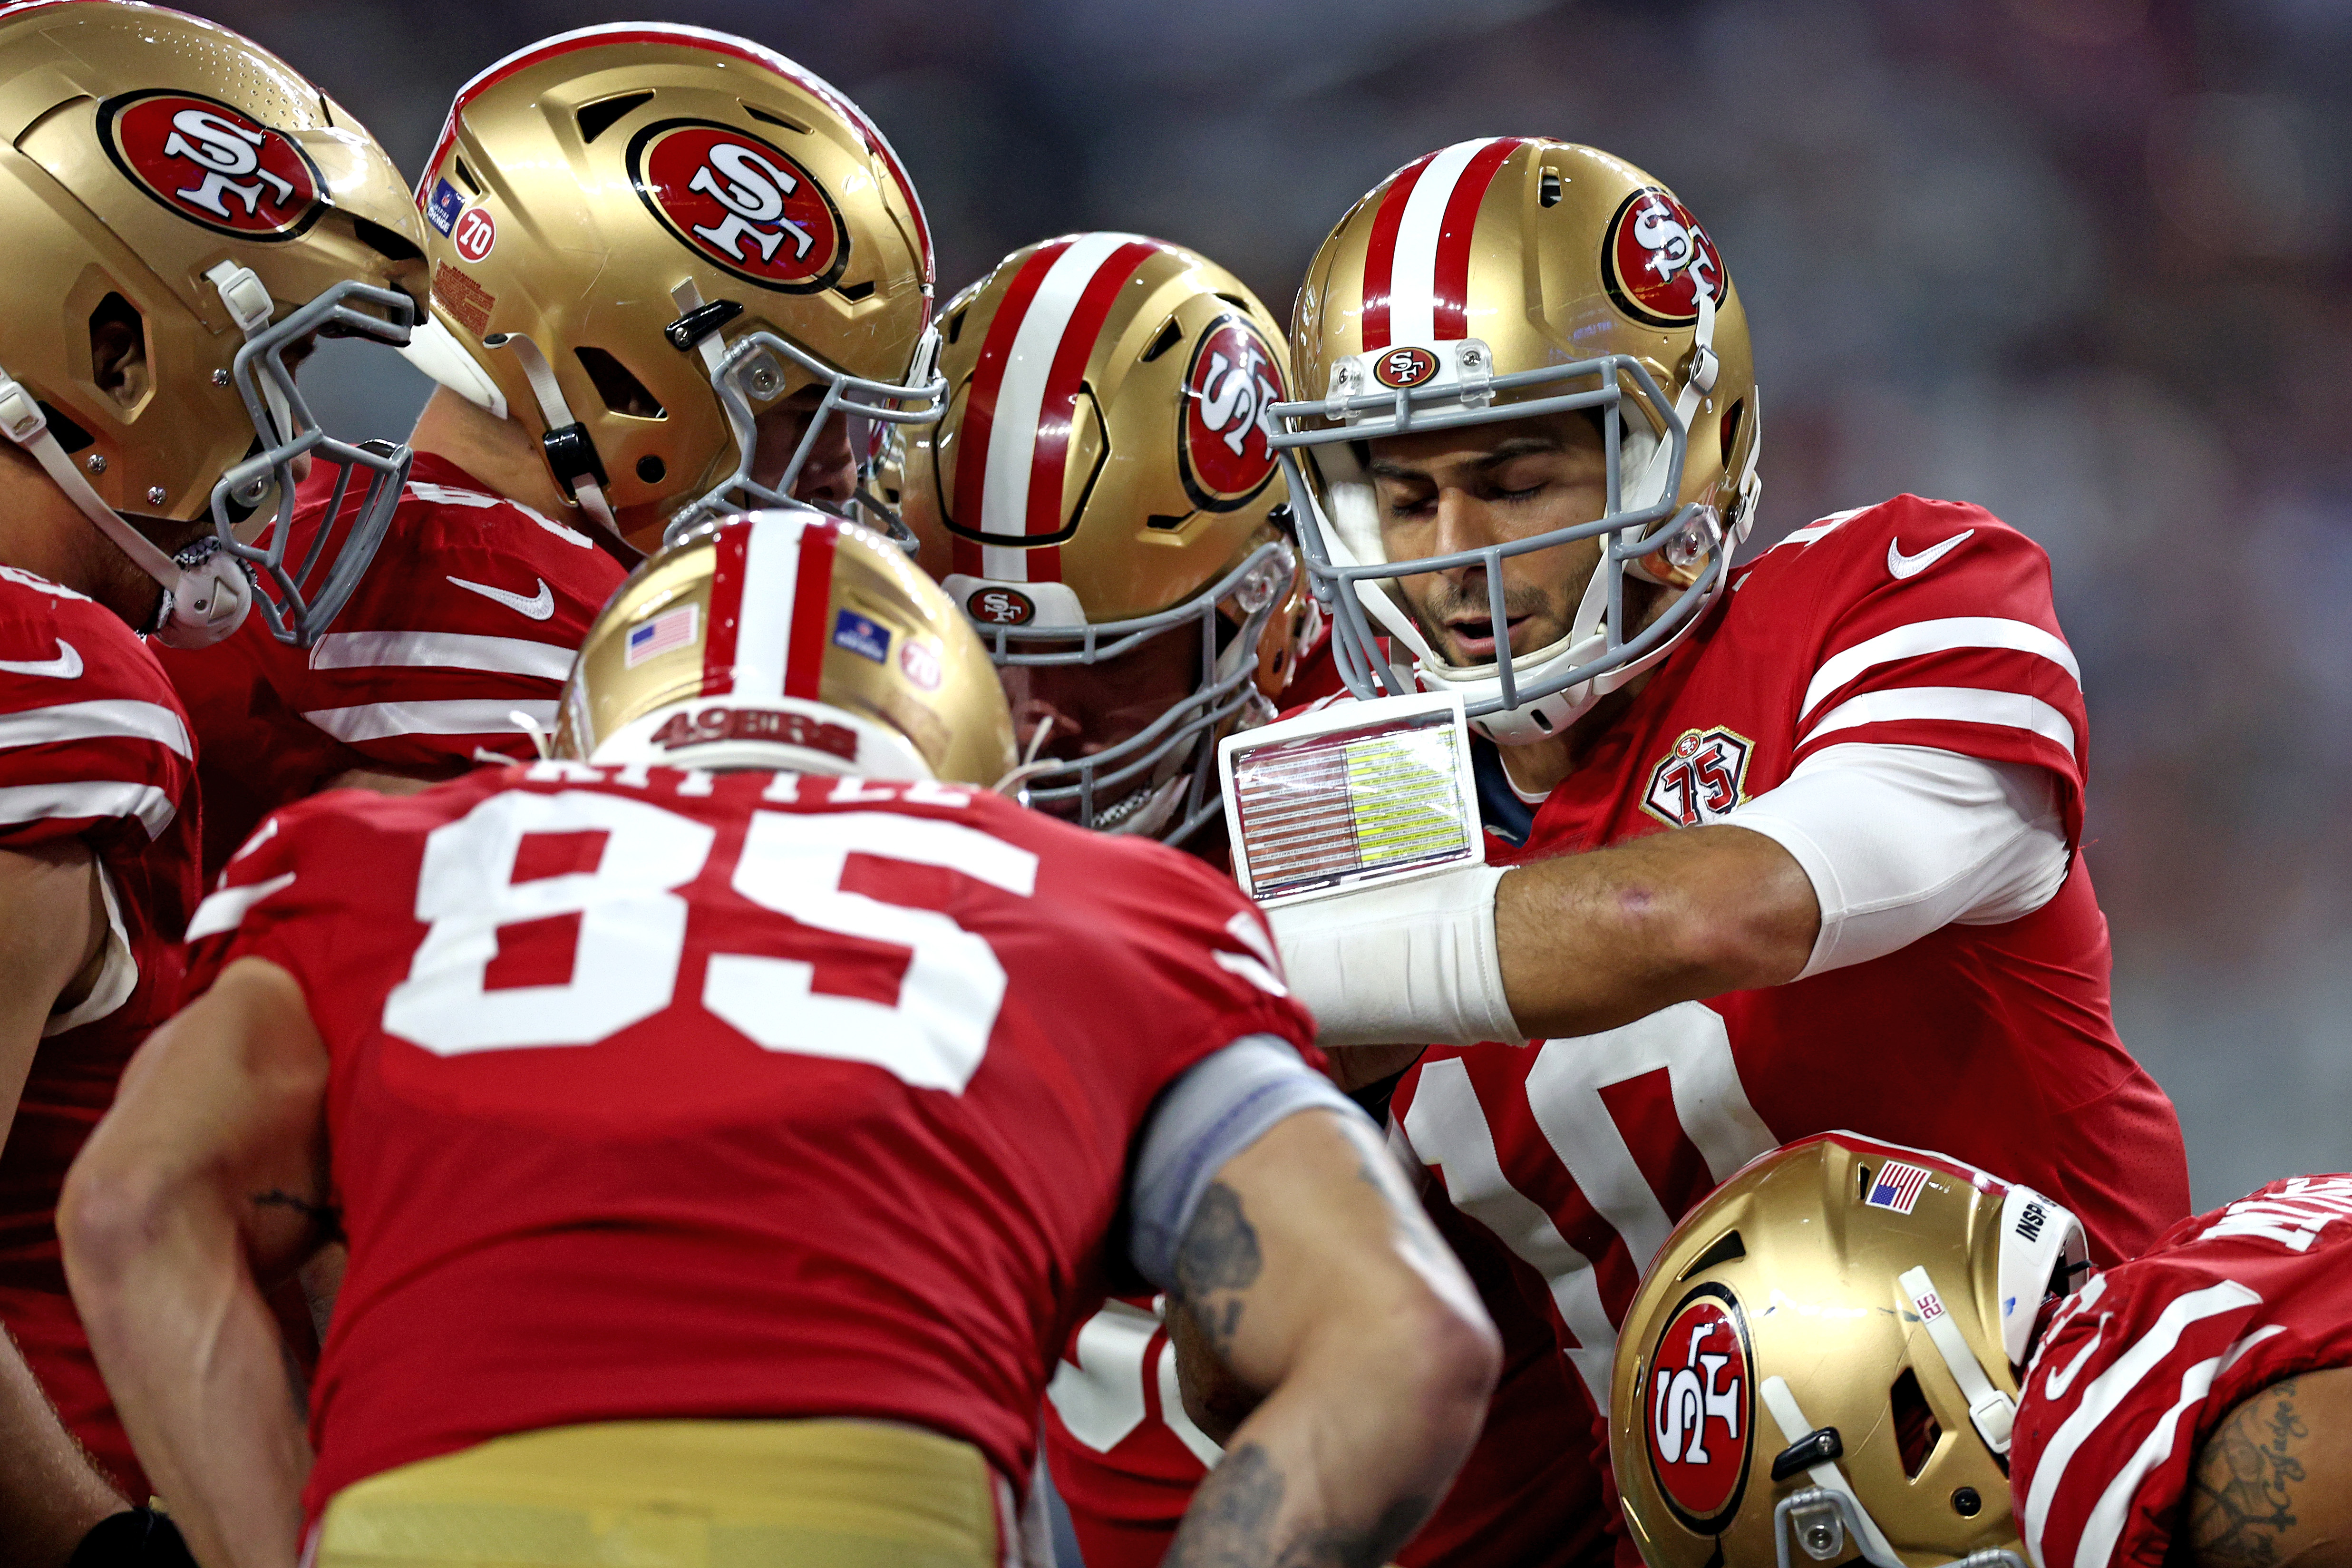 NFL playoff schedule: 49ers vs. Cowboys game time, TV channel